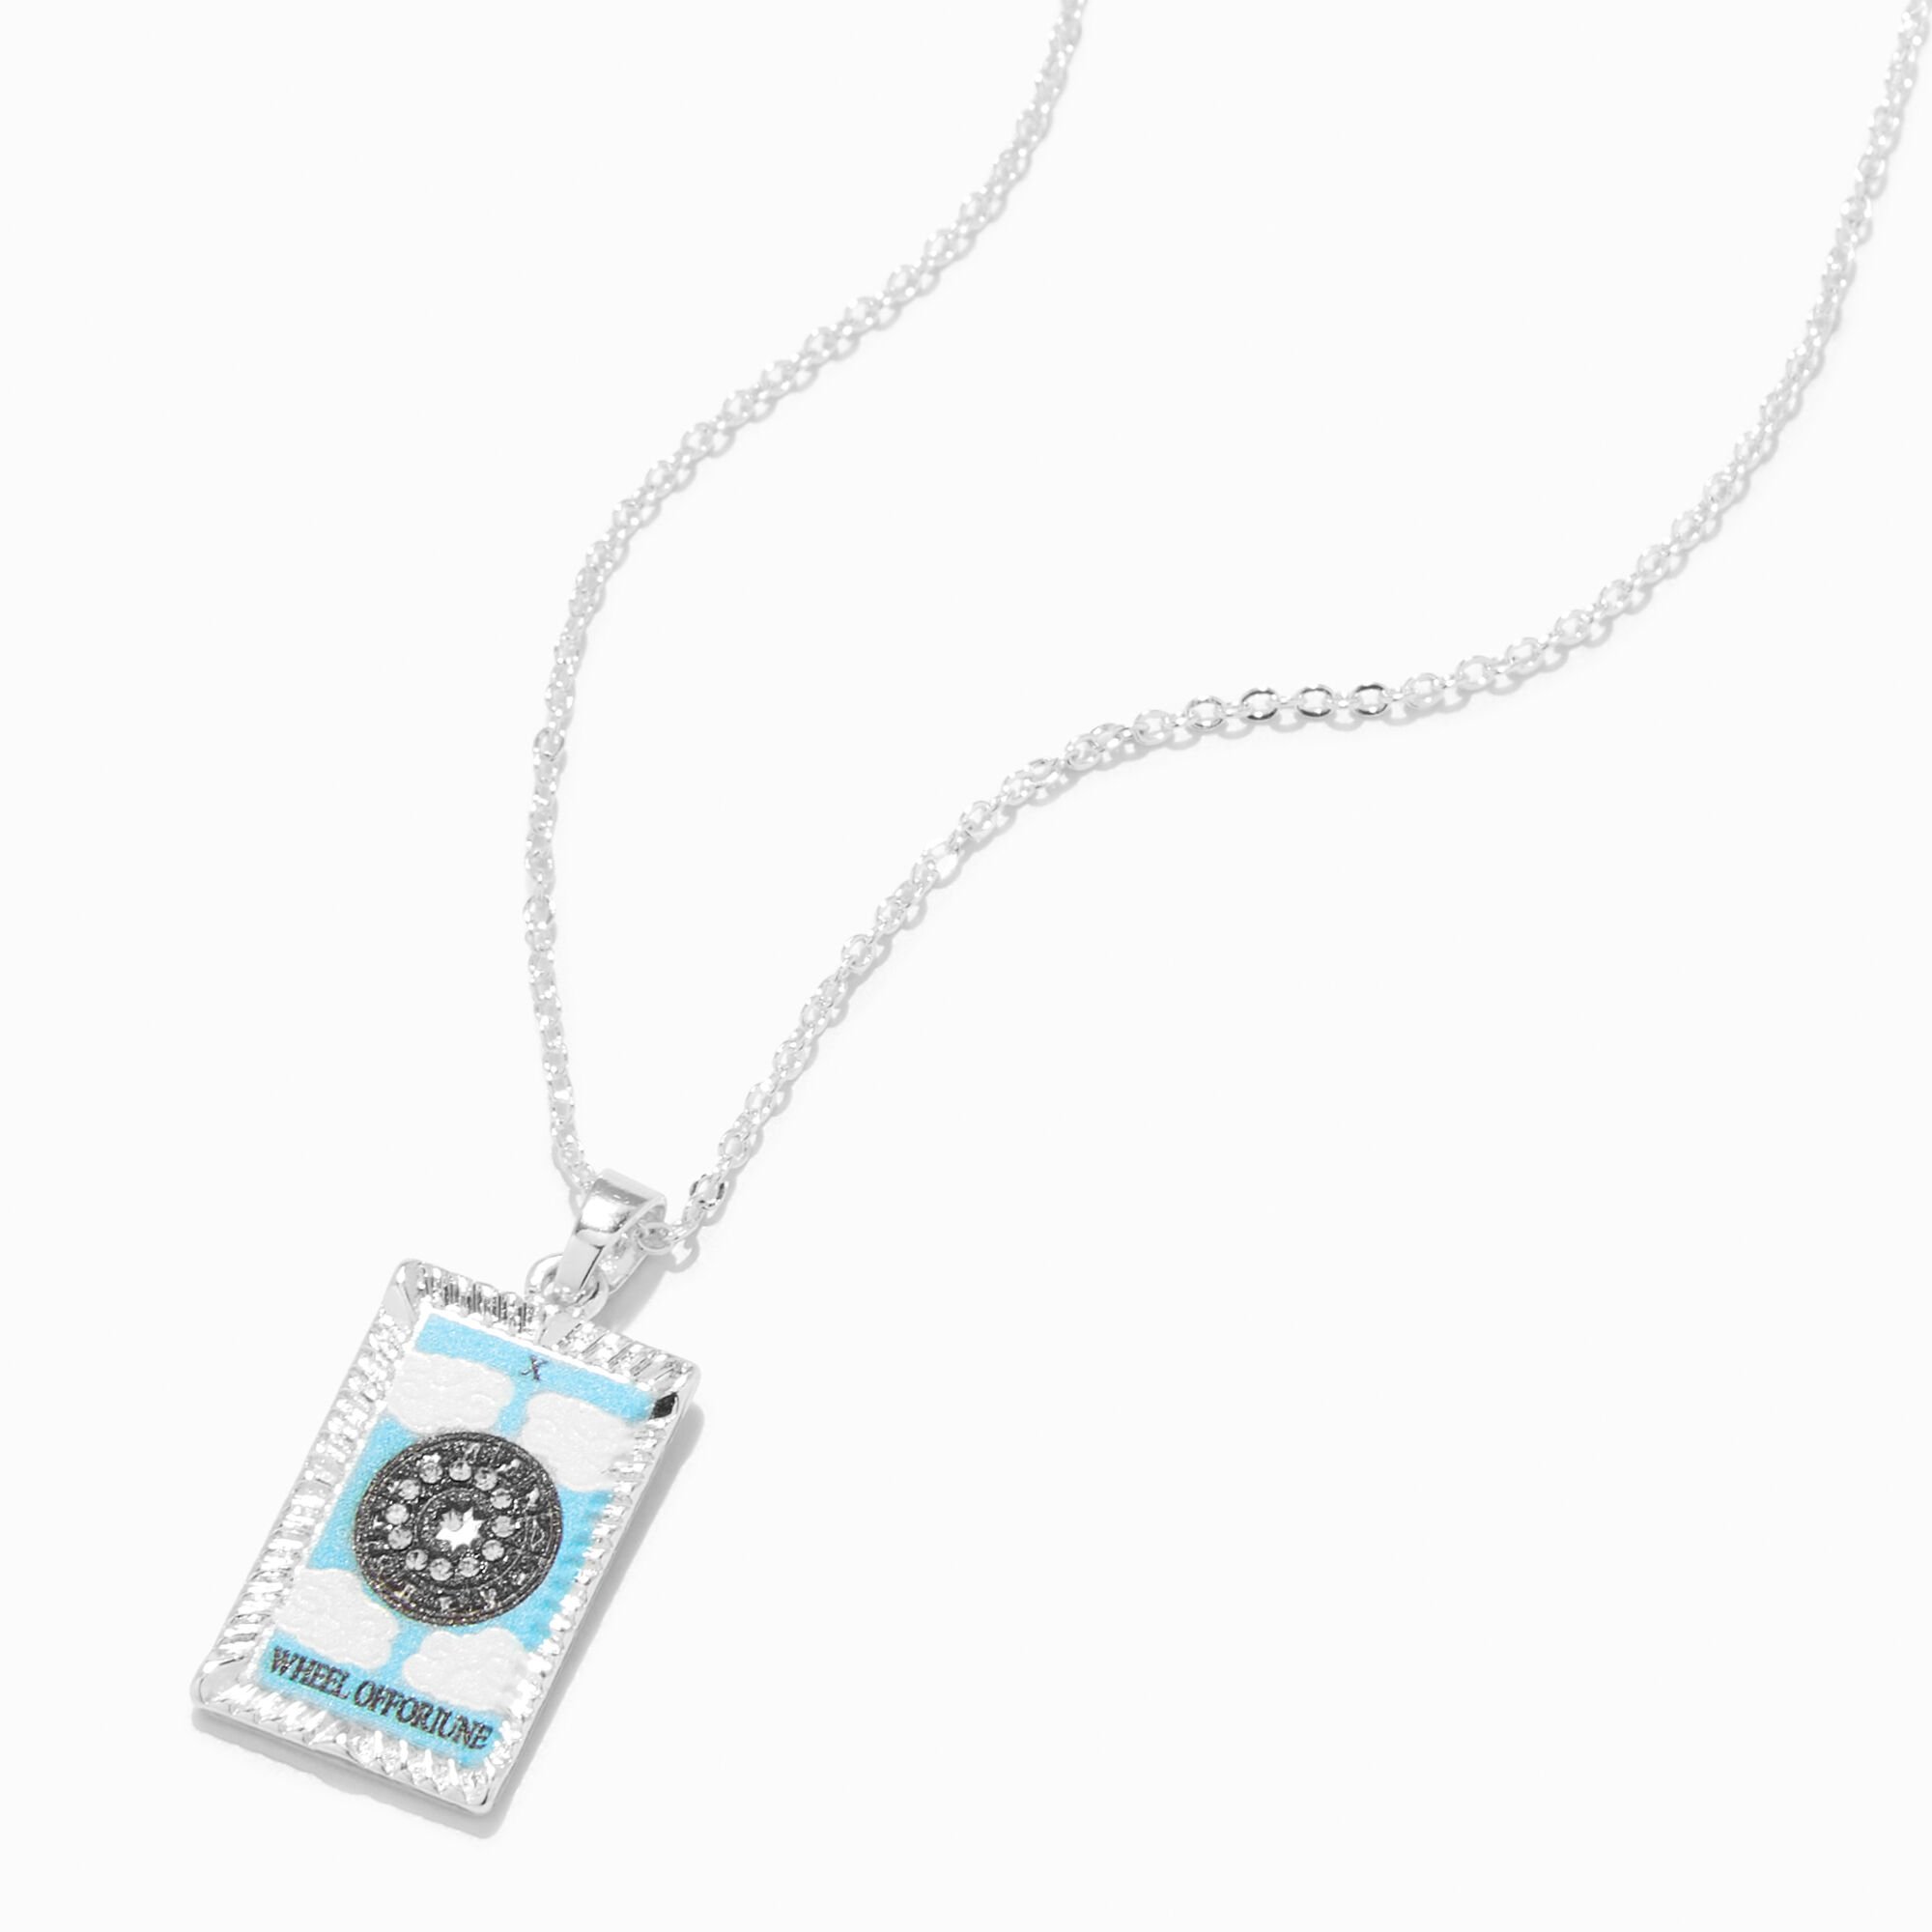 View Claires The Wheel Of Fortune Tarot Card Pendant Necklace Blue information